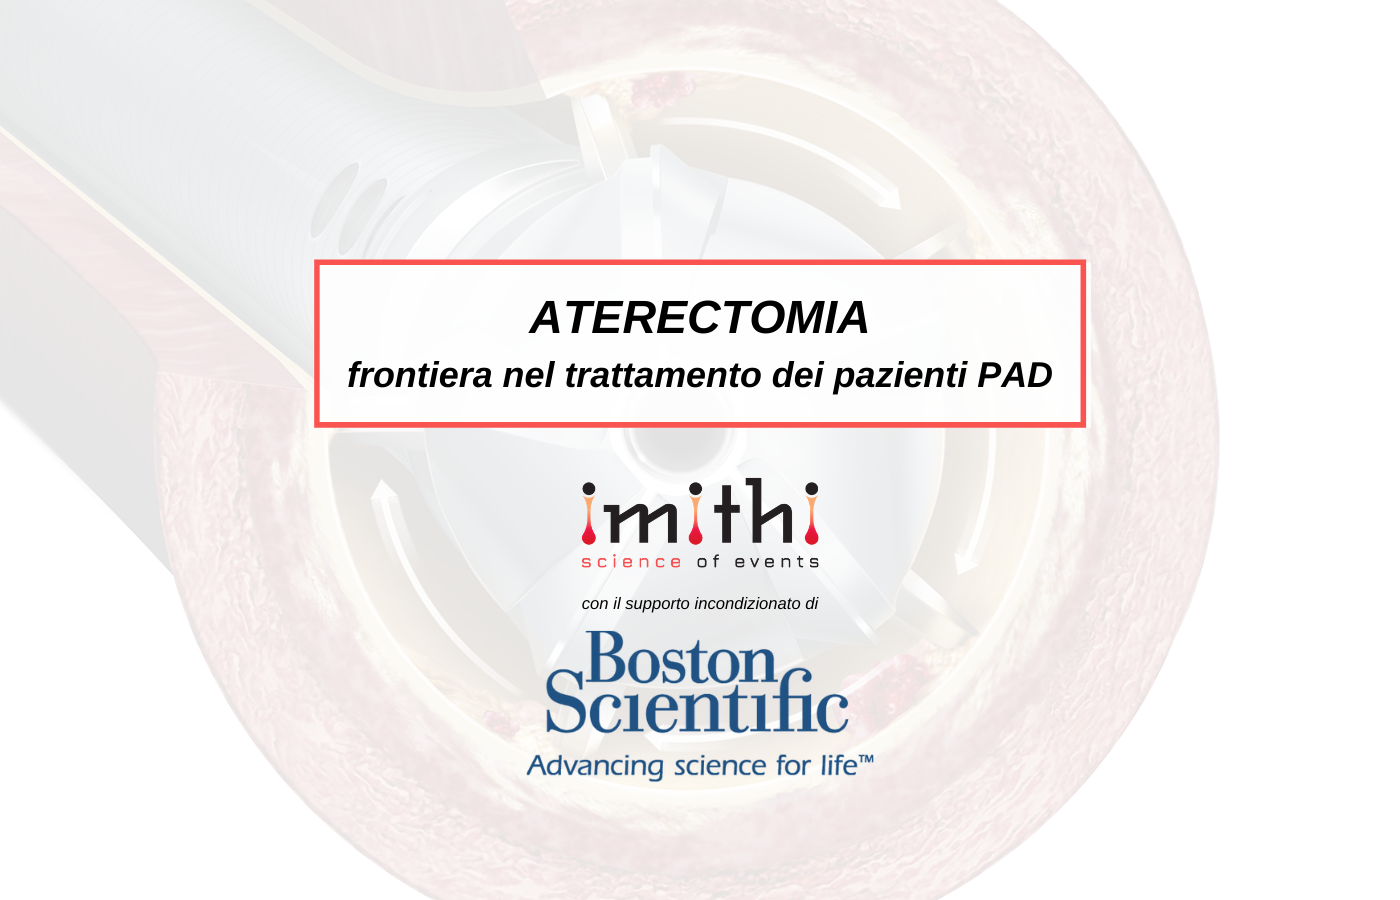 Atherectomy: a frontier in the treatment of PAD patients